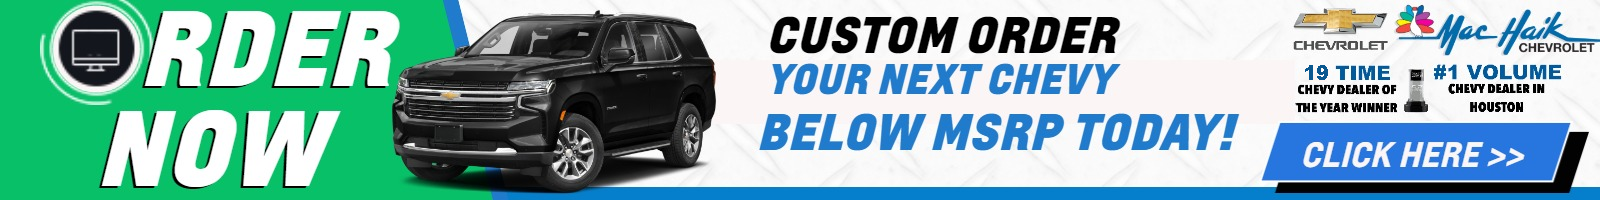 Custom OrderDon't see the vehicle you want?Custom order your next Chevy today!